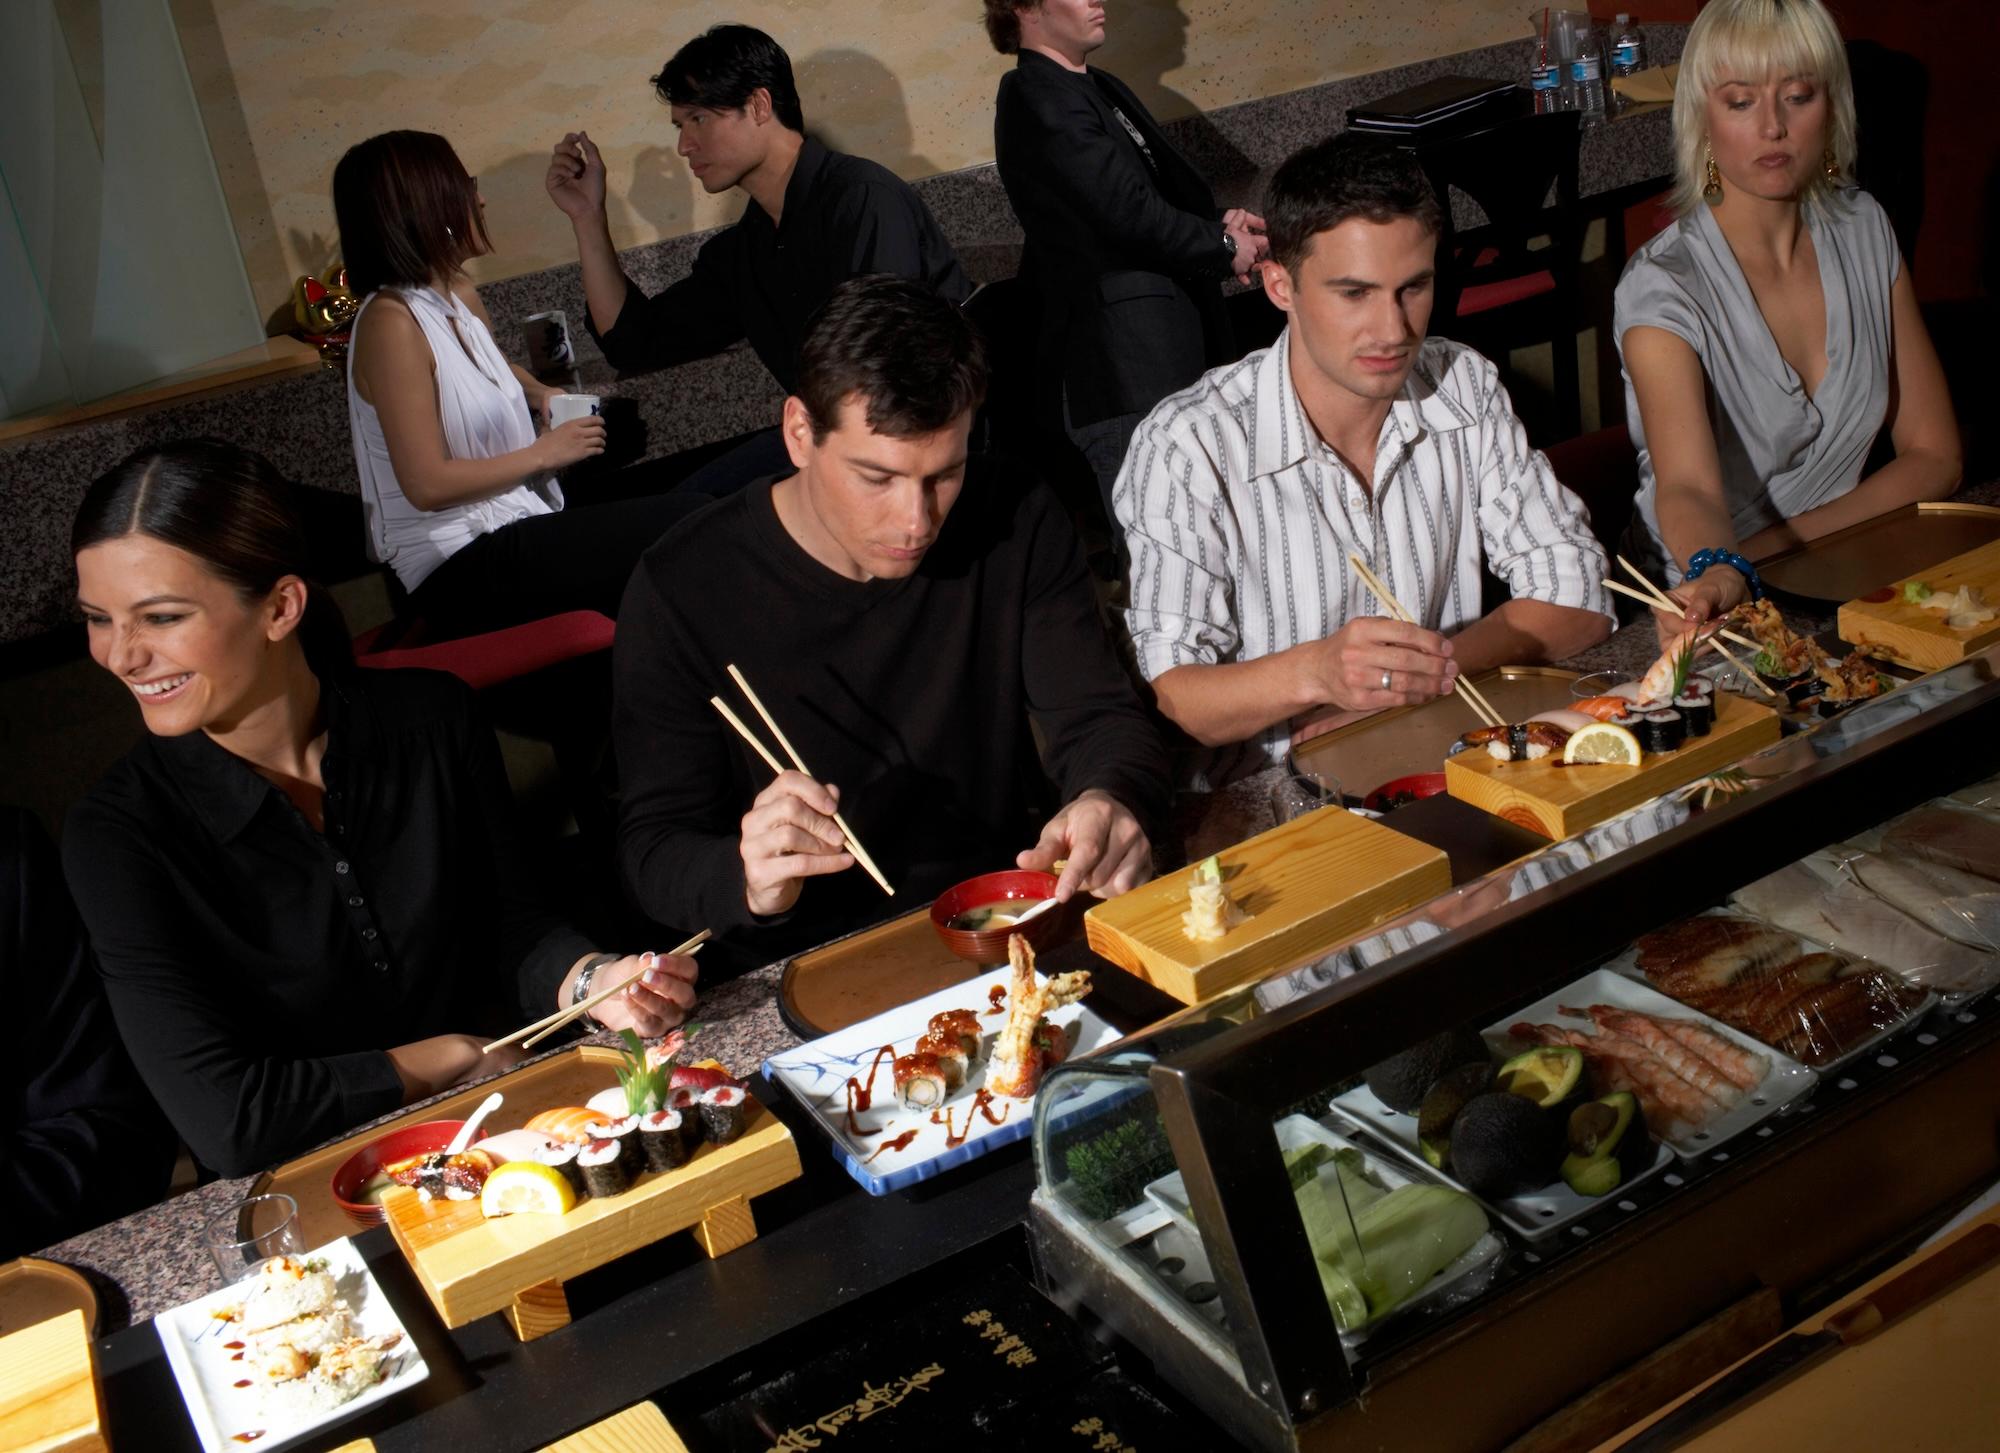 young people eating sushi at the sushi bar counter